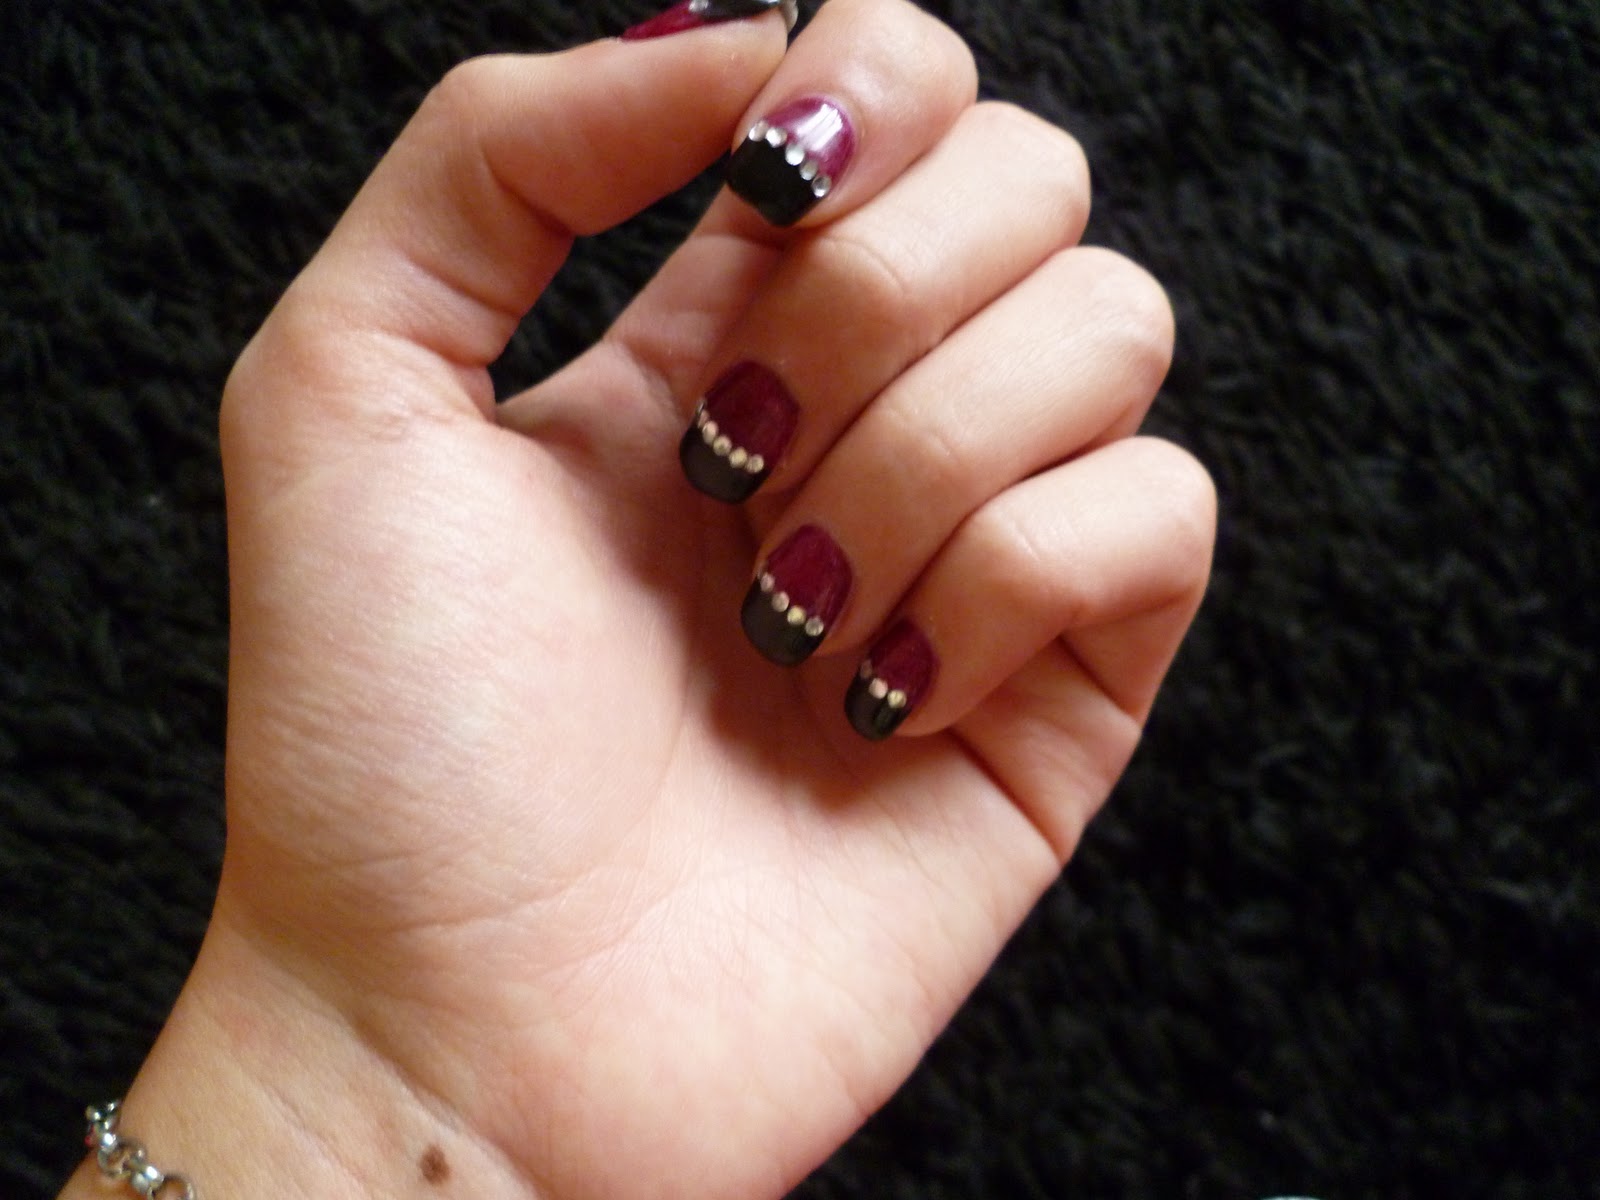 2. "Trendy November Nail Colors to Try This Season" - wide 2